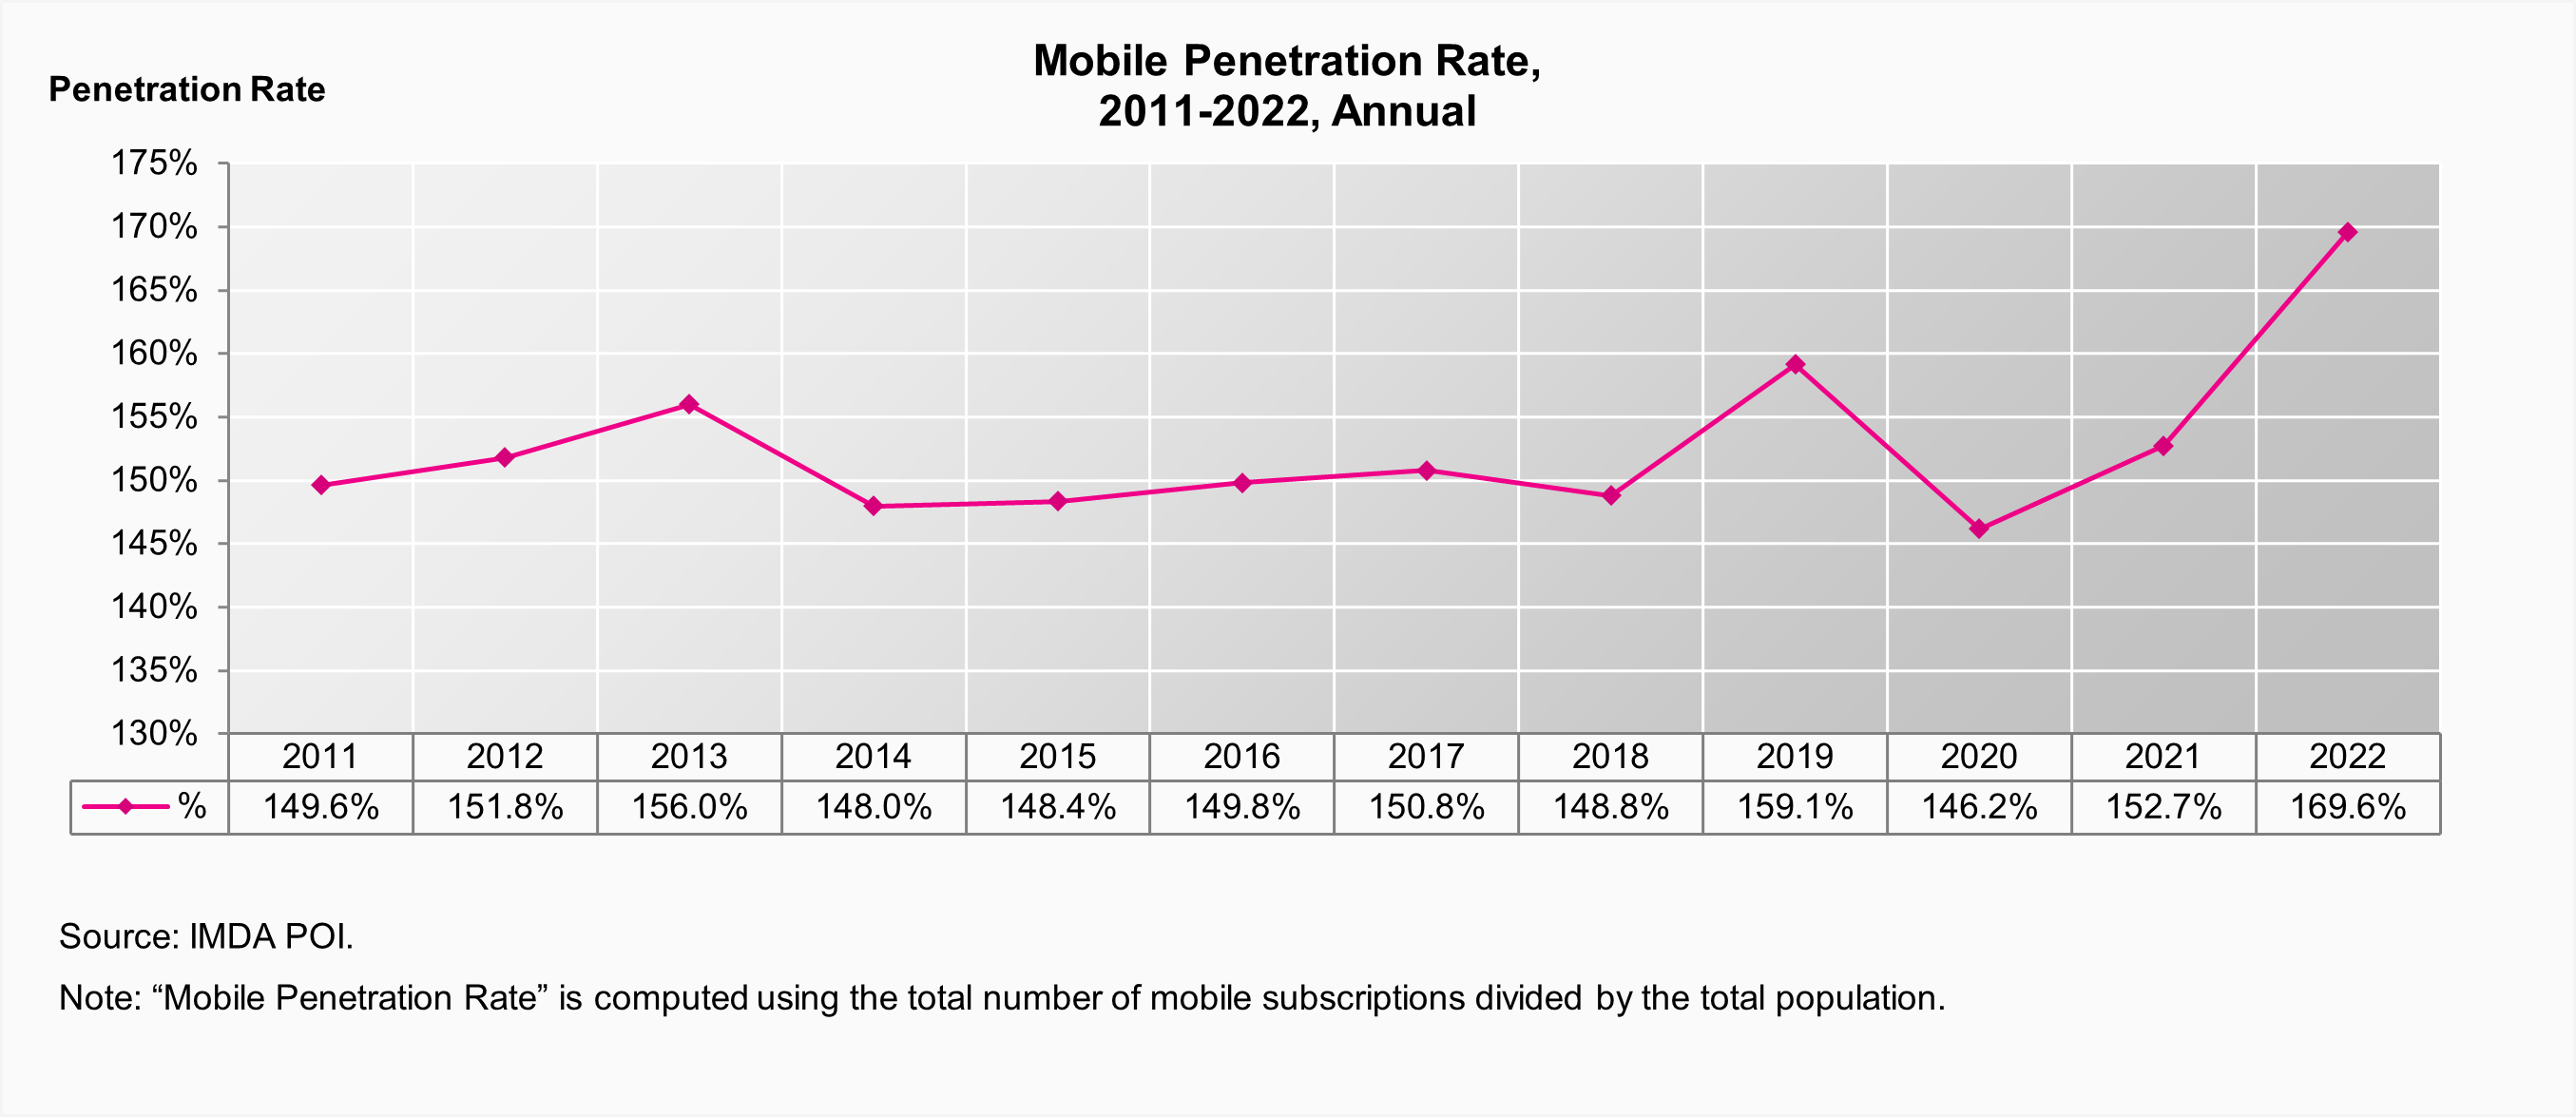 A Statistical Chart on Mobile Penetration Rate 2011 - 2022, Annual by IMDA POI